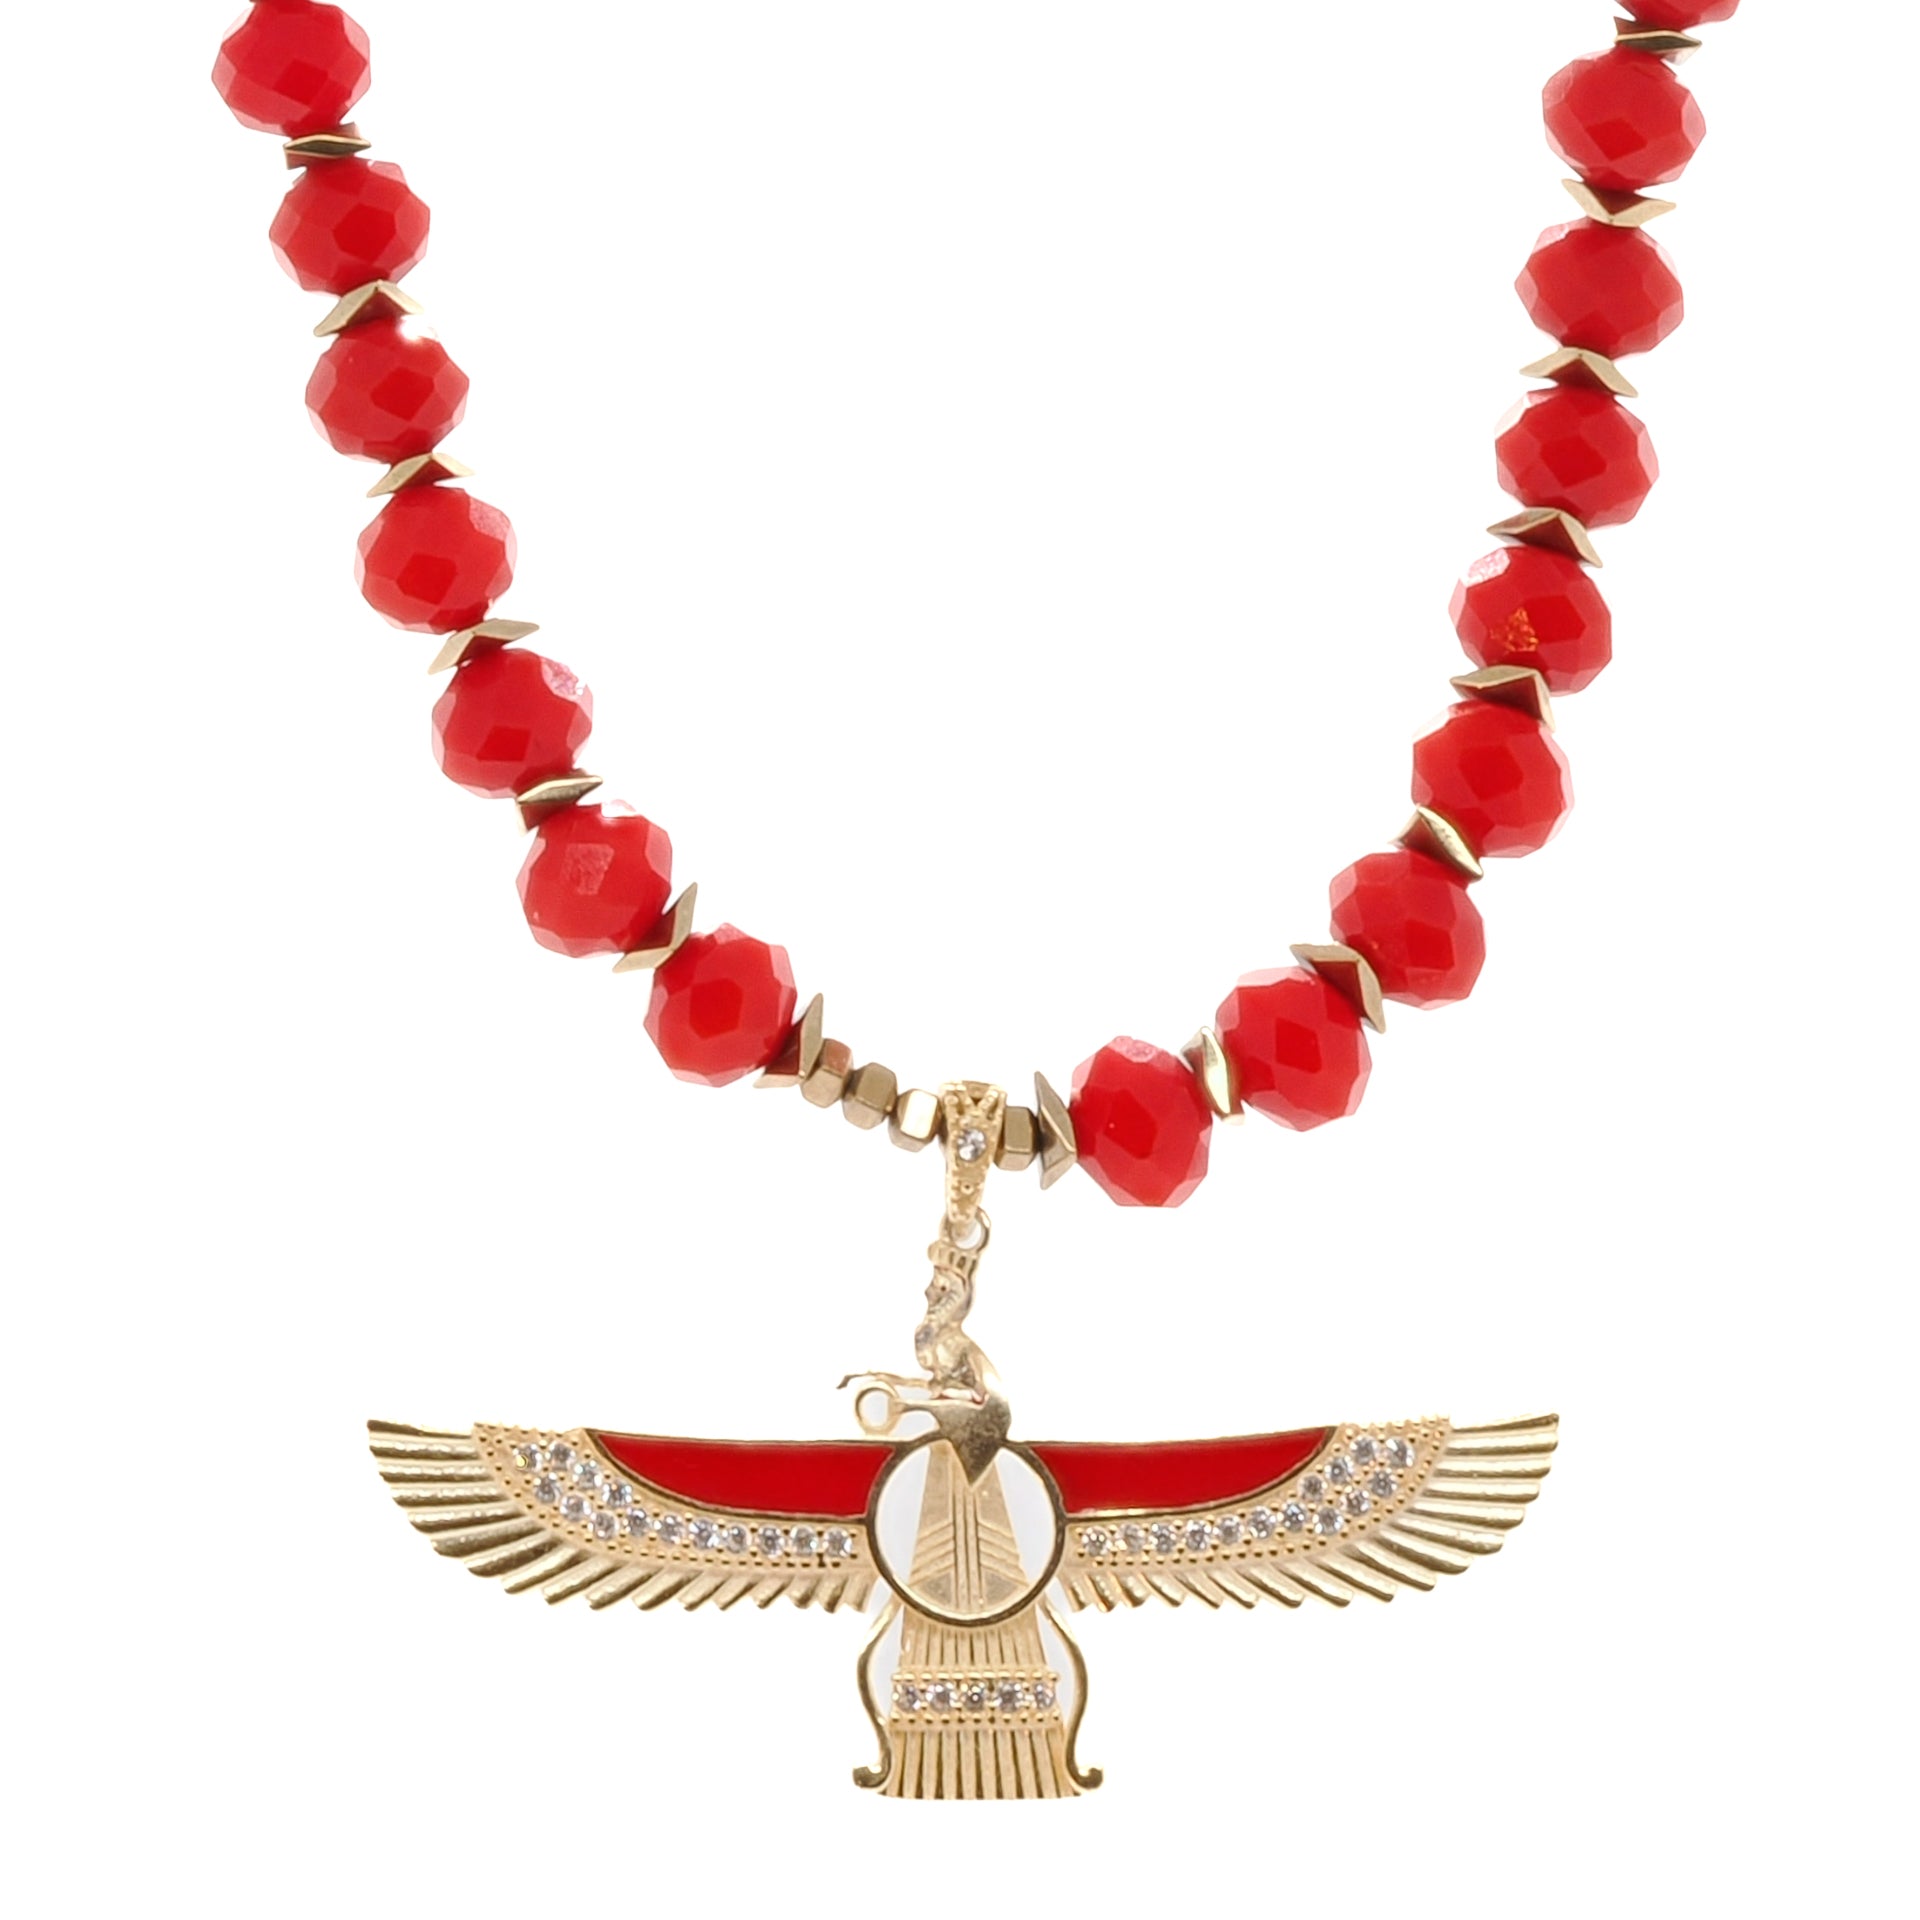 Powerful and Meaningful - The Handcrafted Red Crystal Faravahar Necklace Shines Brightly.